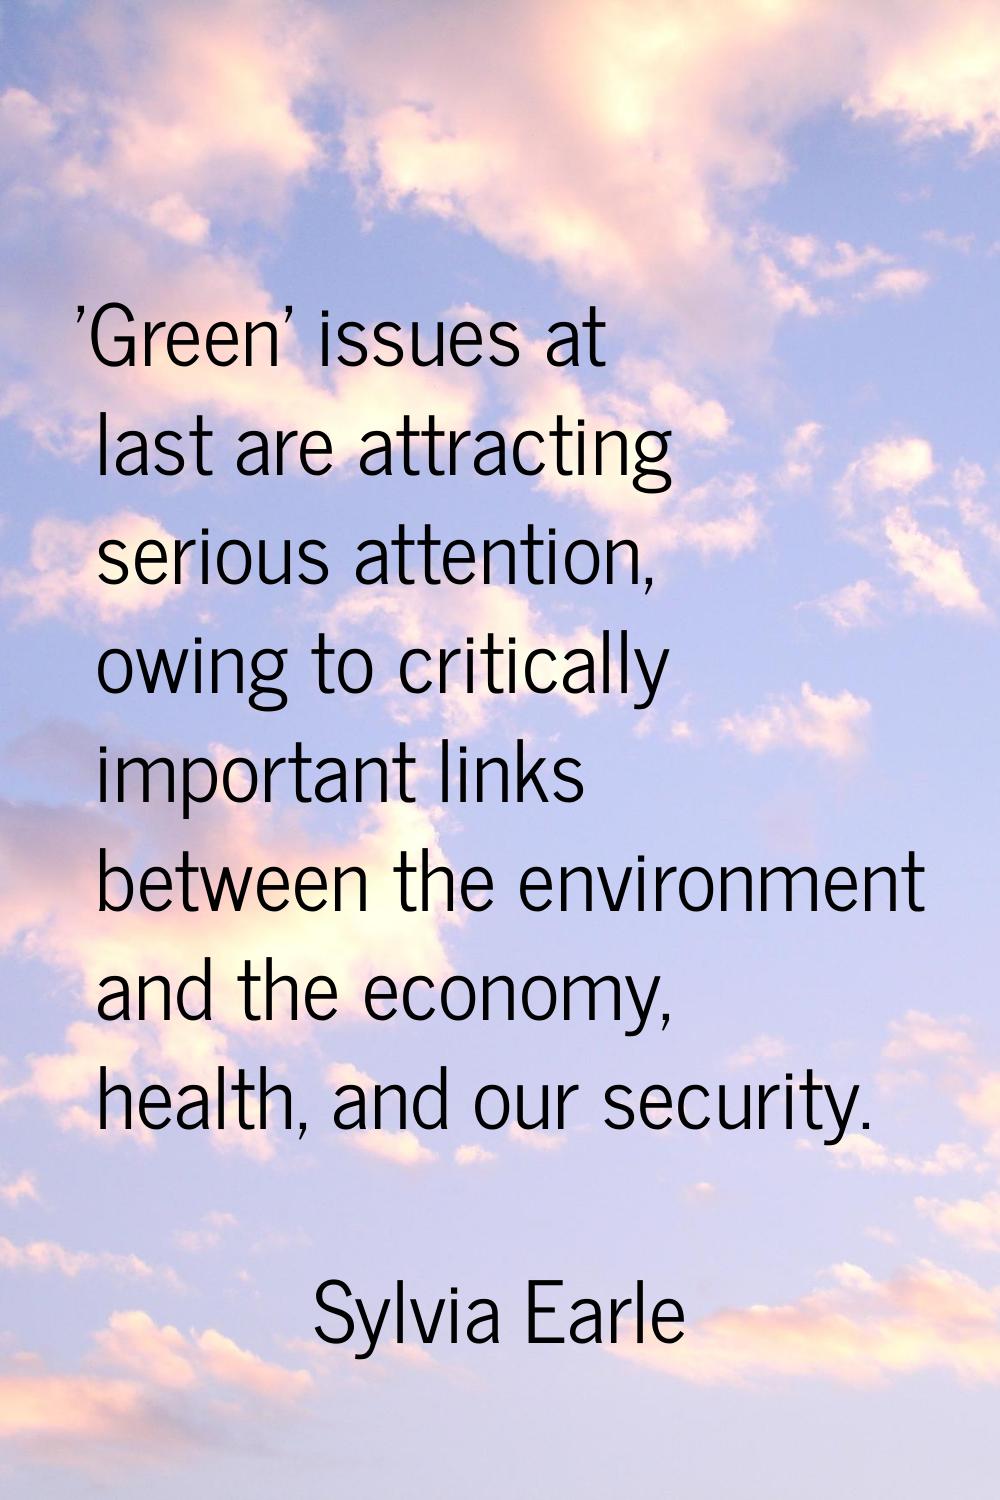 'Green' issues at last are attracting serious attention, owing to critically important links betwee